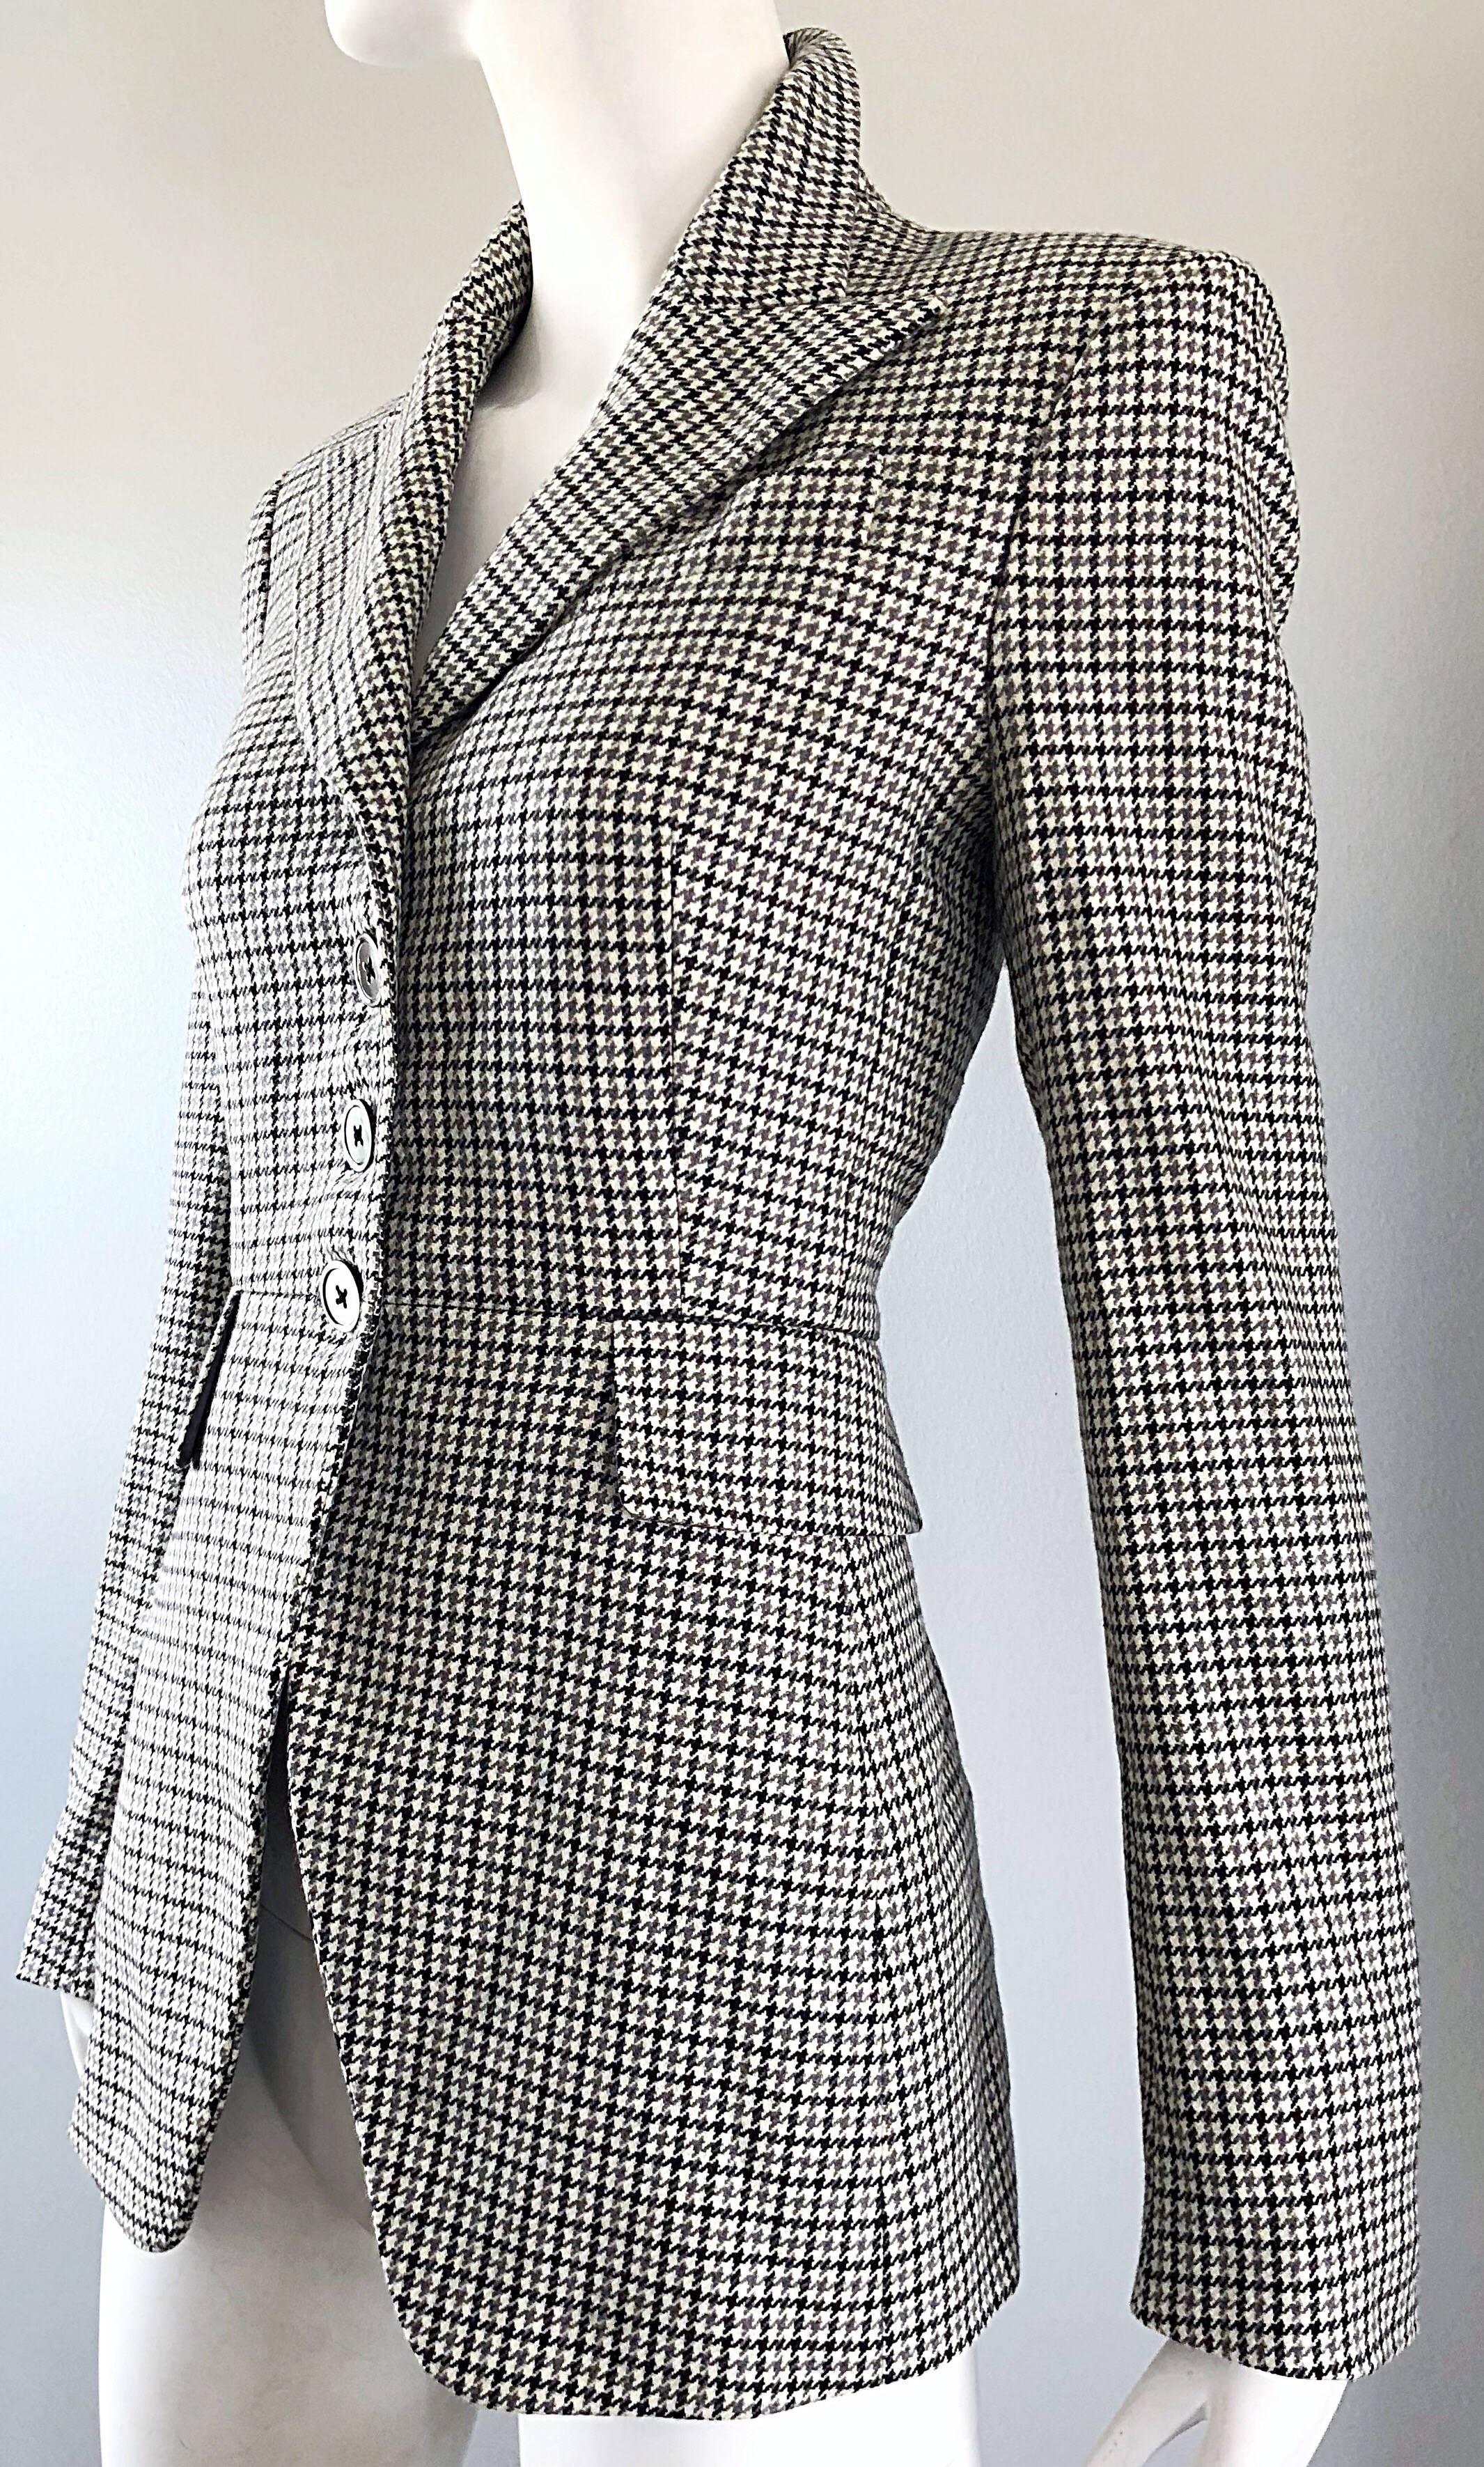 Women's Michael Kors Collection 1990s Size 2 / 4 Gray + Black Houndstooth Blazer Jacket For Sale